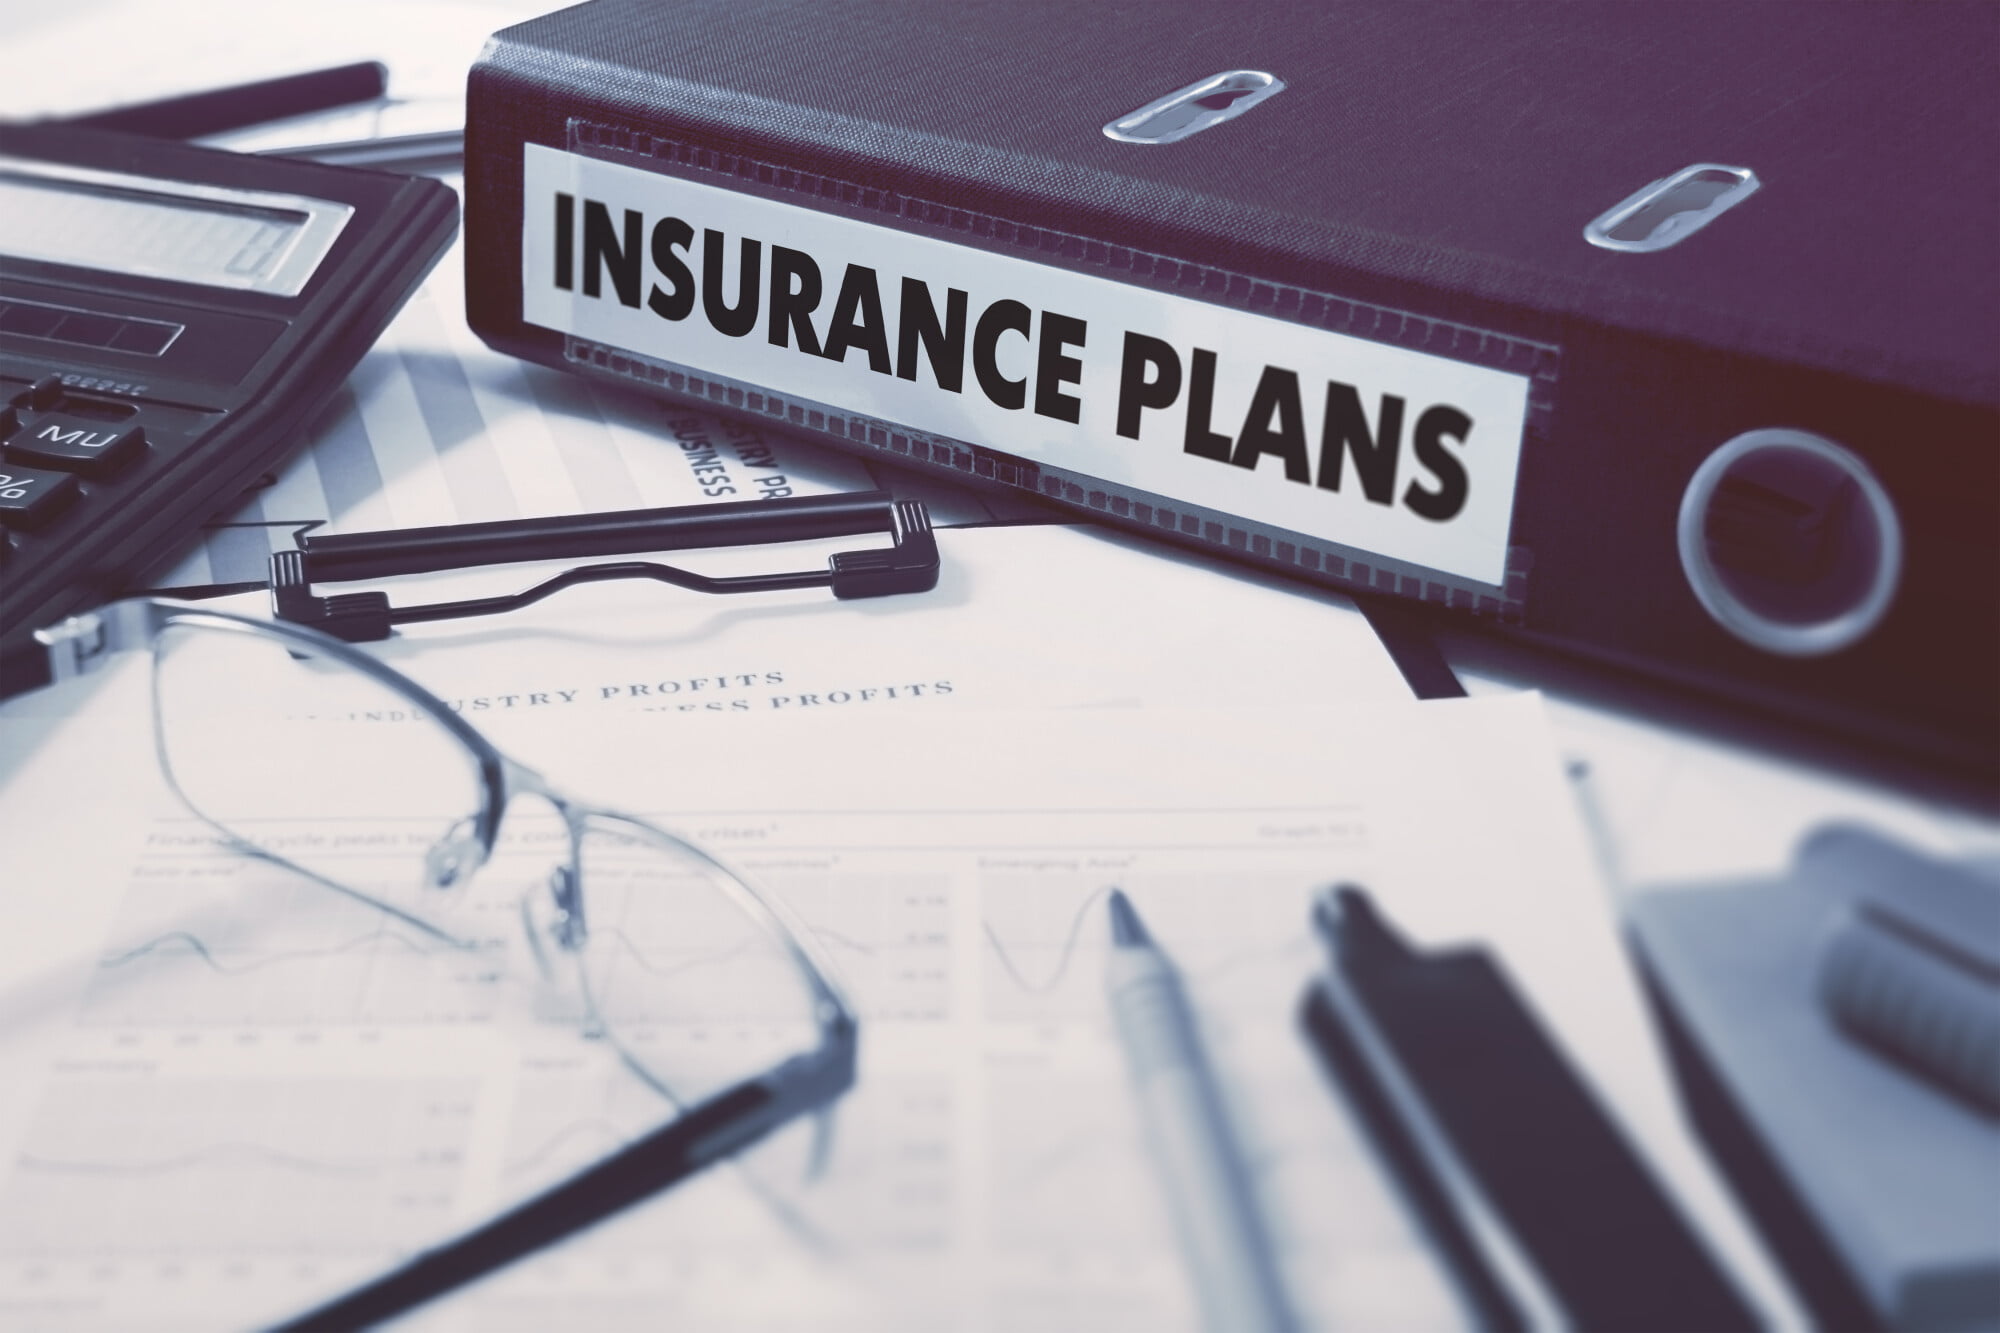 It's important to have the right insurance cover and to select the best policy for your needs. See our tips about buying insurance to learn more today.